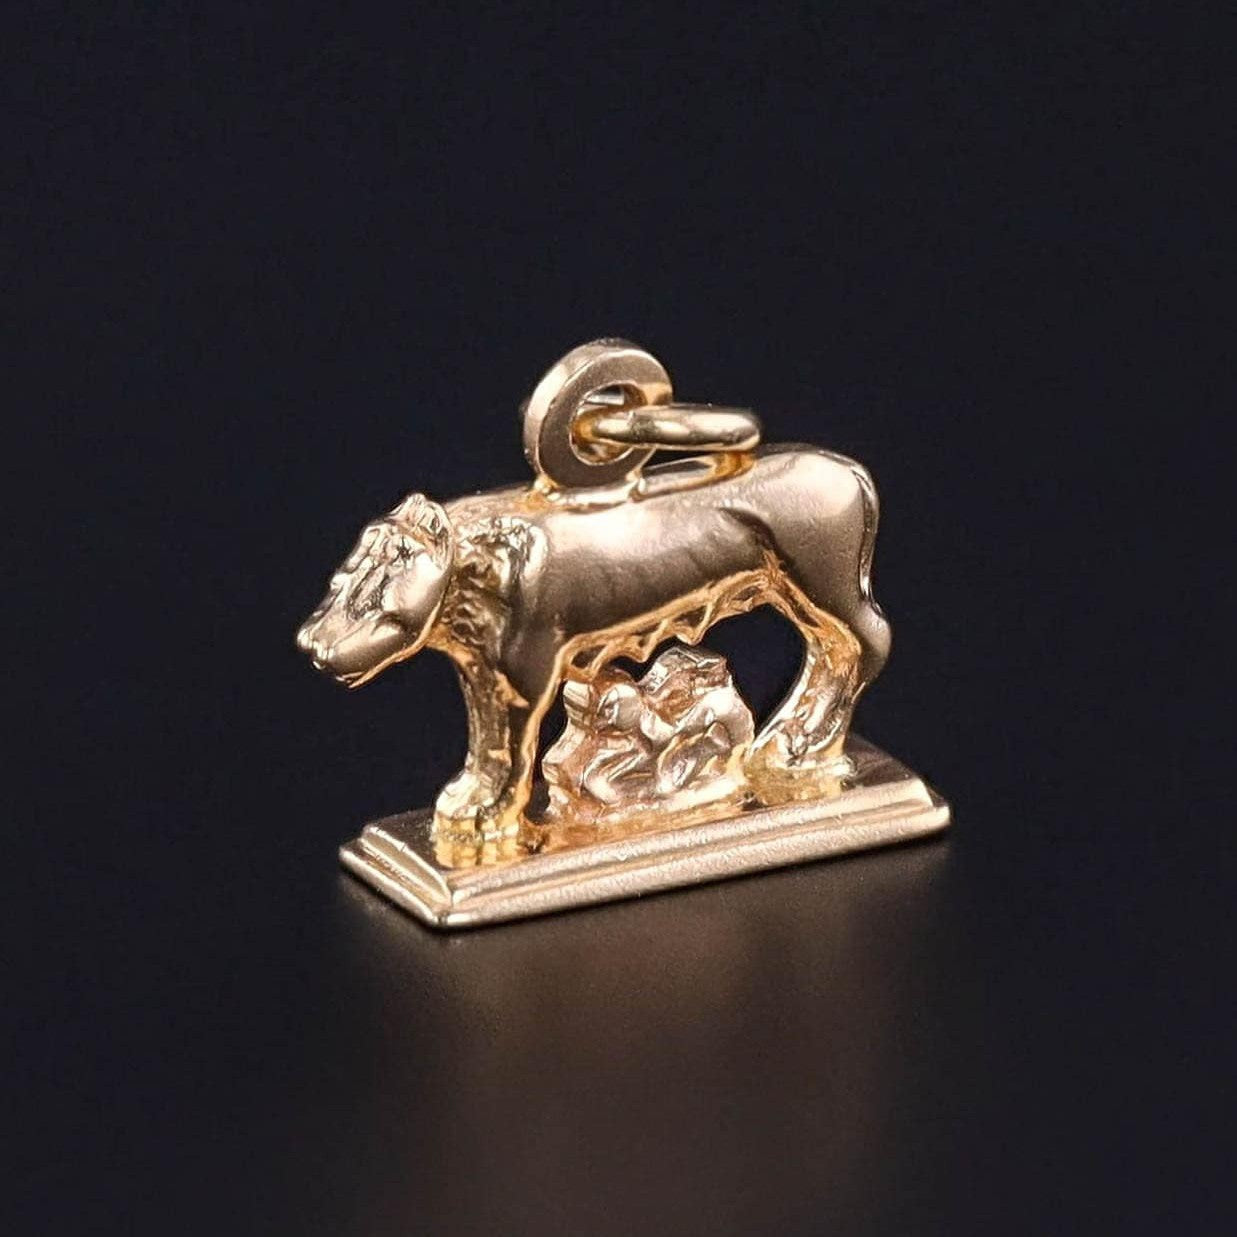 Vintage Romulus and Remus Charm of 18k Gold